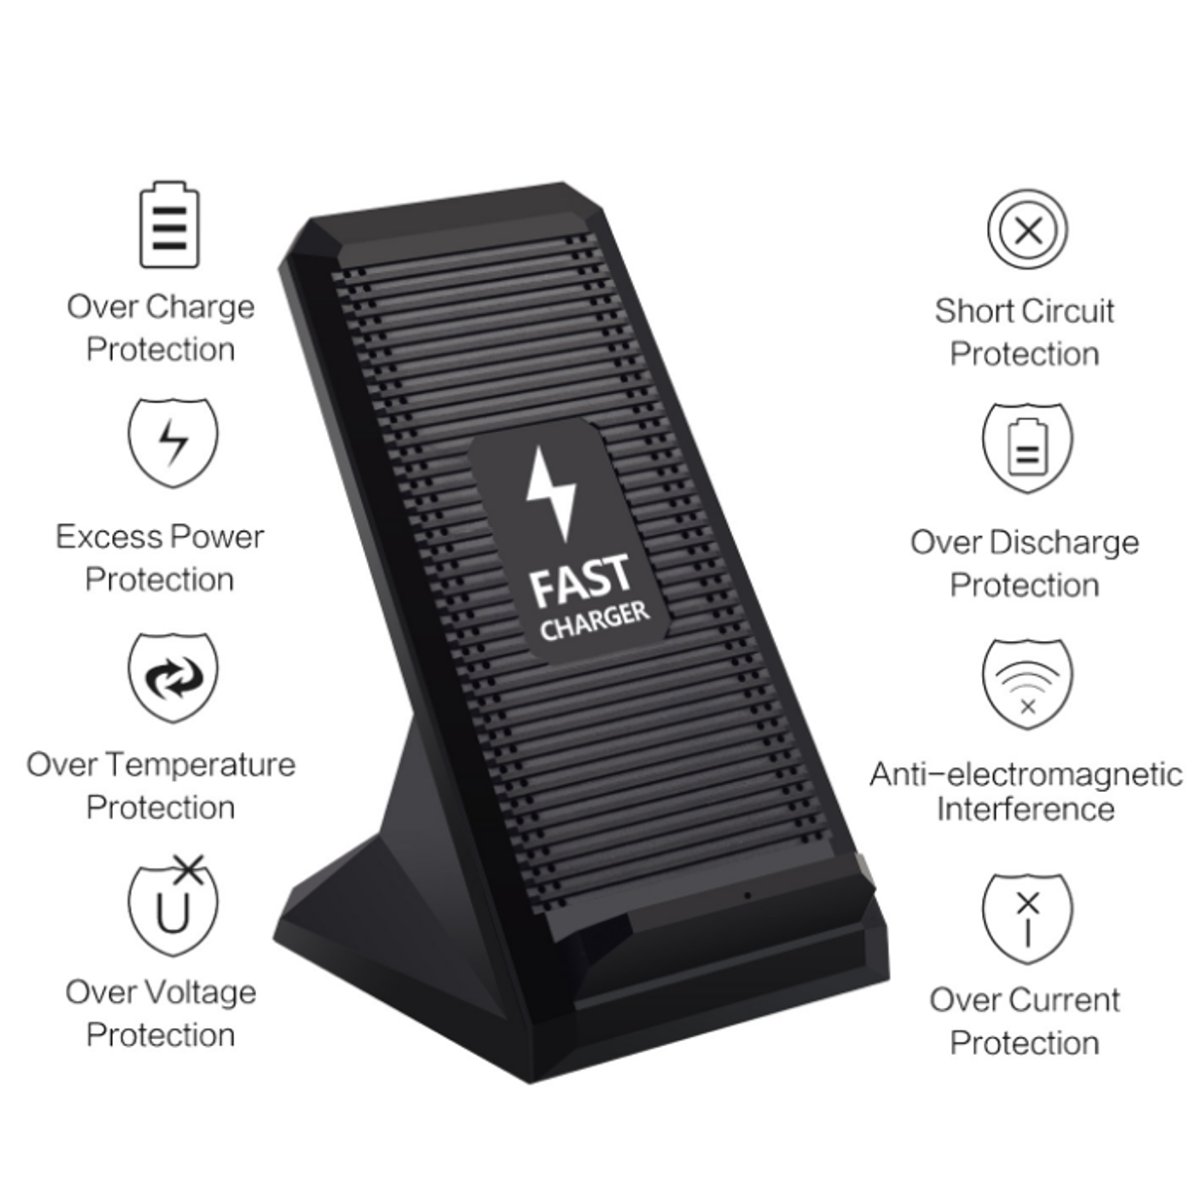 10W-Qi-Wireless-Charger-Fast-Charging-With-Cooling-Fan-Phone-Holder-For-iPhone-Samsung-Huawei-1422834-2